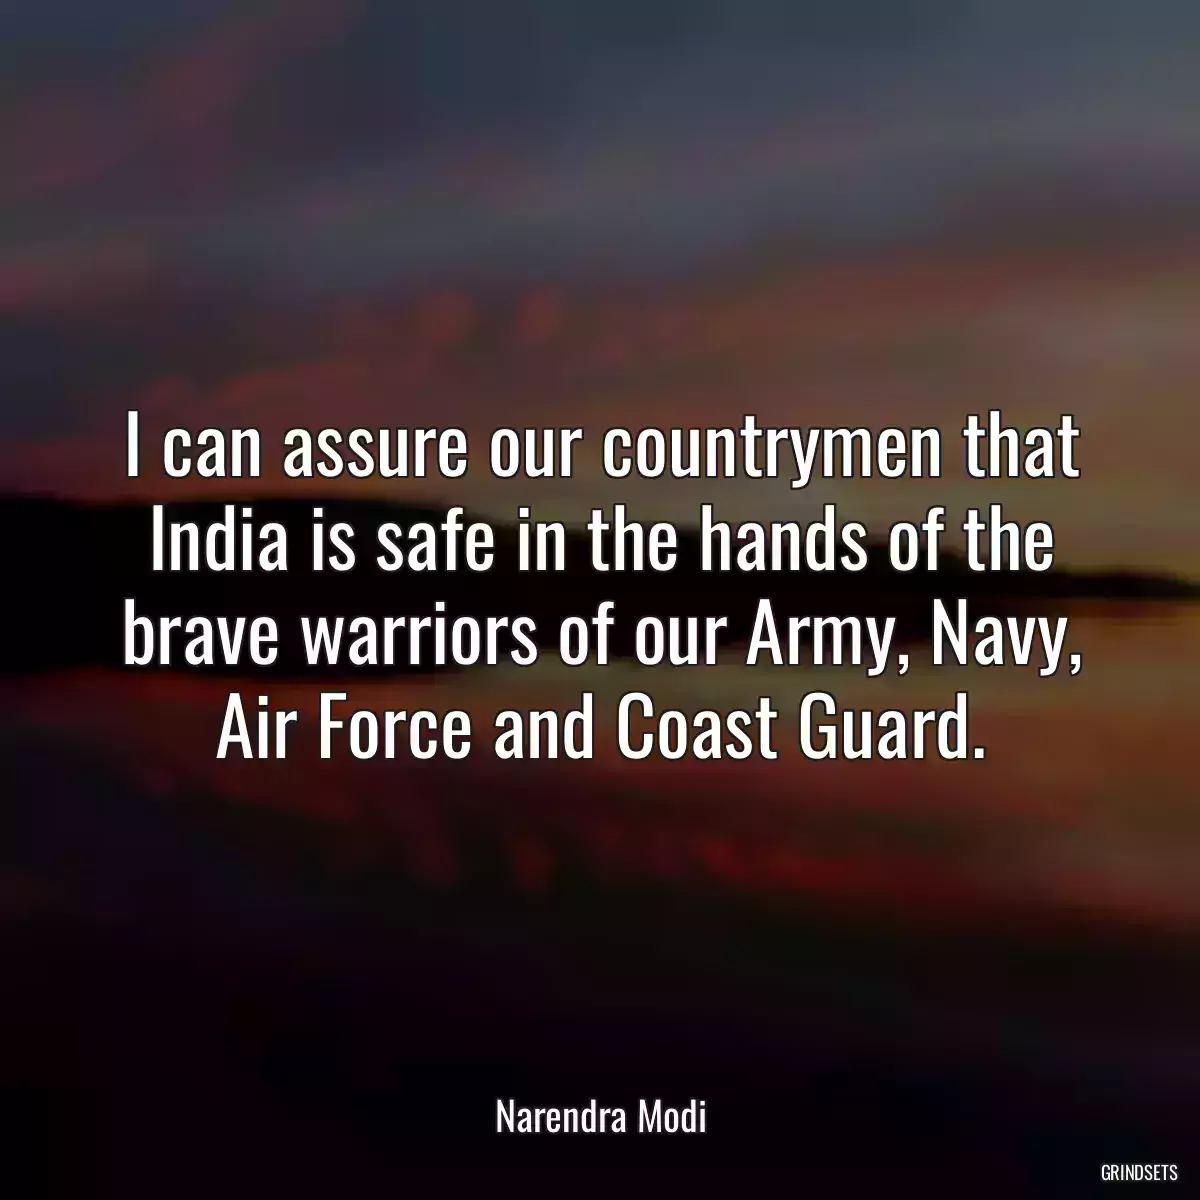 I can assure our countrymen that India is safe in the hands of the brave warriors of our Army, Navy, Air Force and Coast Guard.